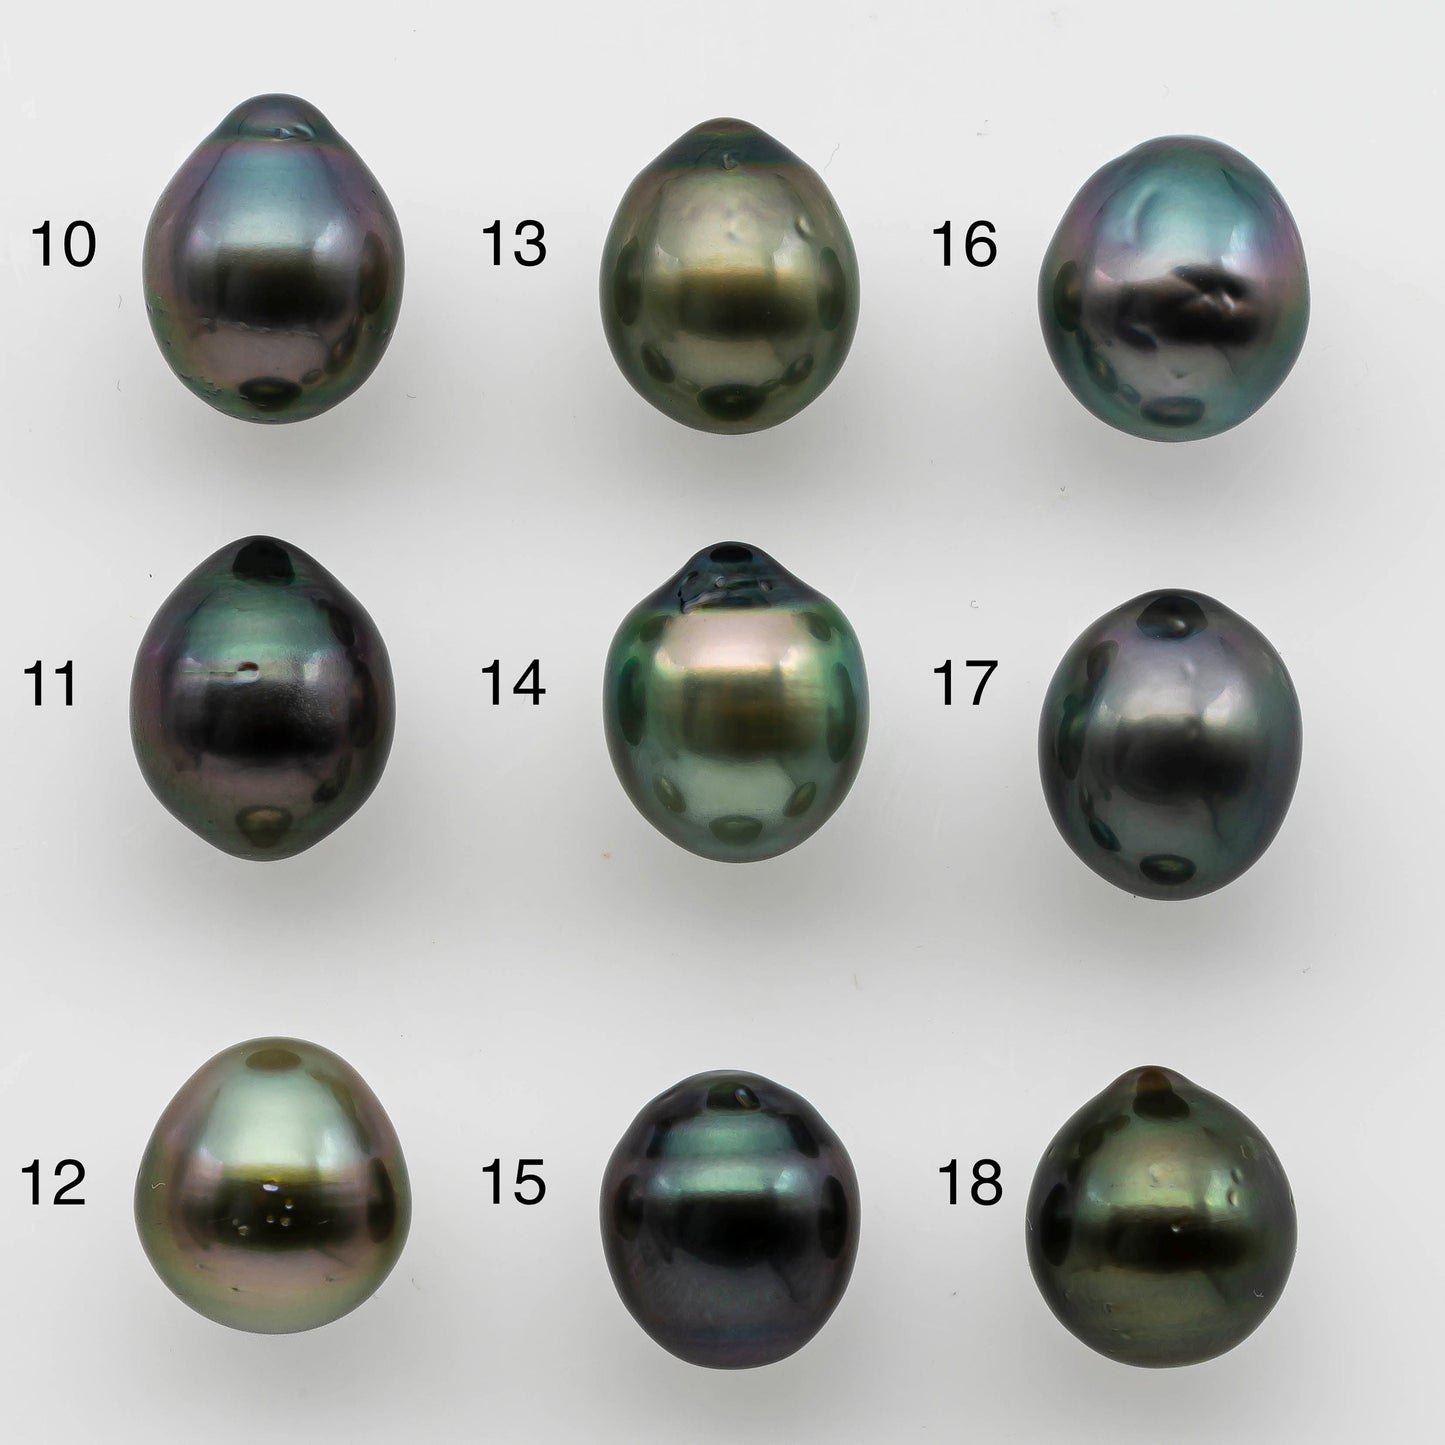 10-11mm Colorful Tahitian Pearl Single Piece Drop in Natural Color and High Luster with Minor Blemishes, Loose Undrilled, SKU # 1484TH